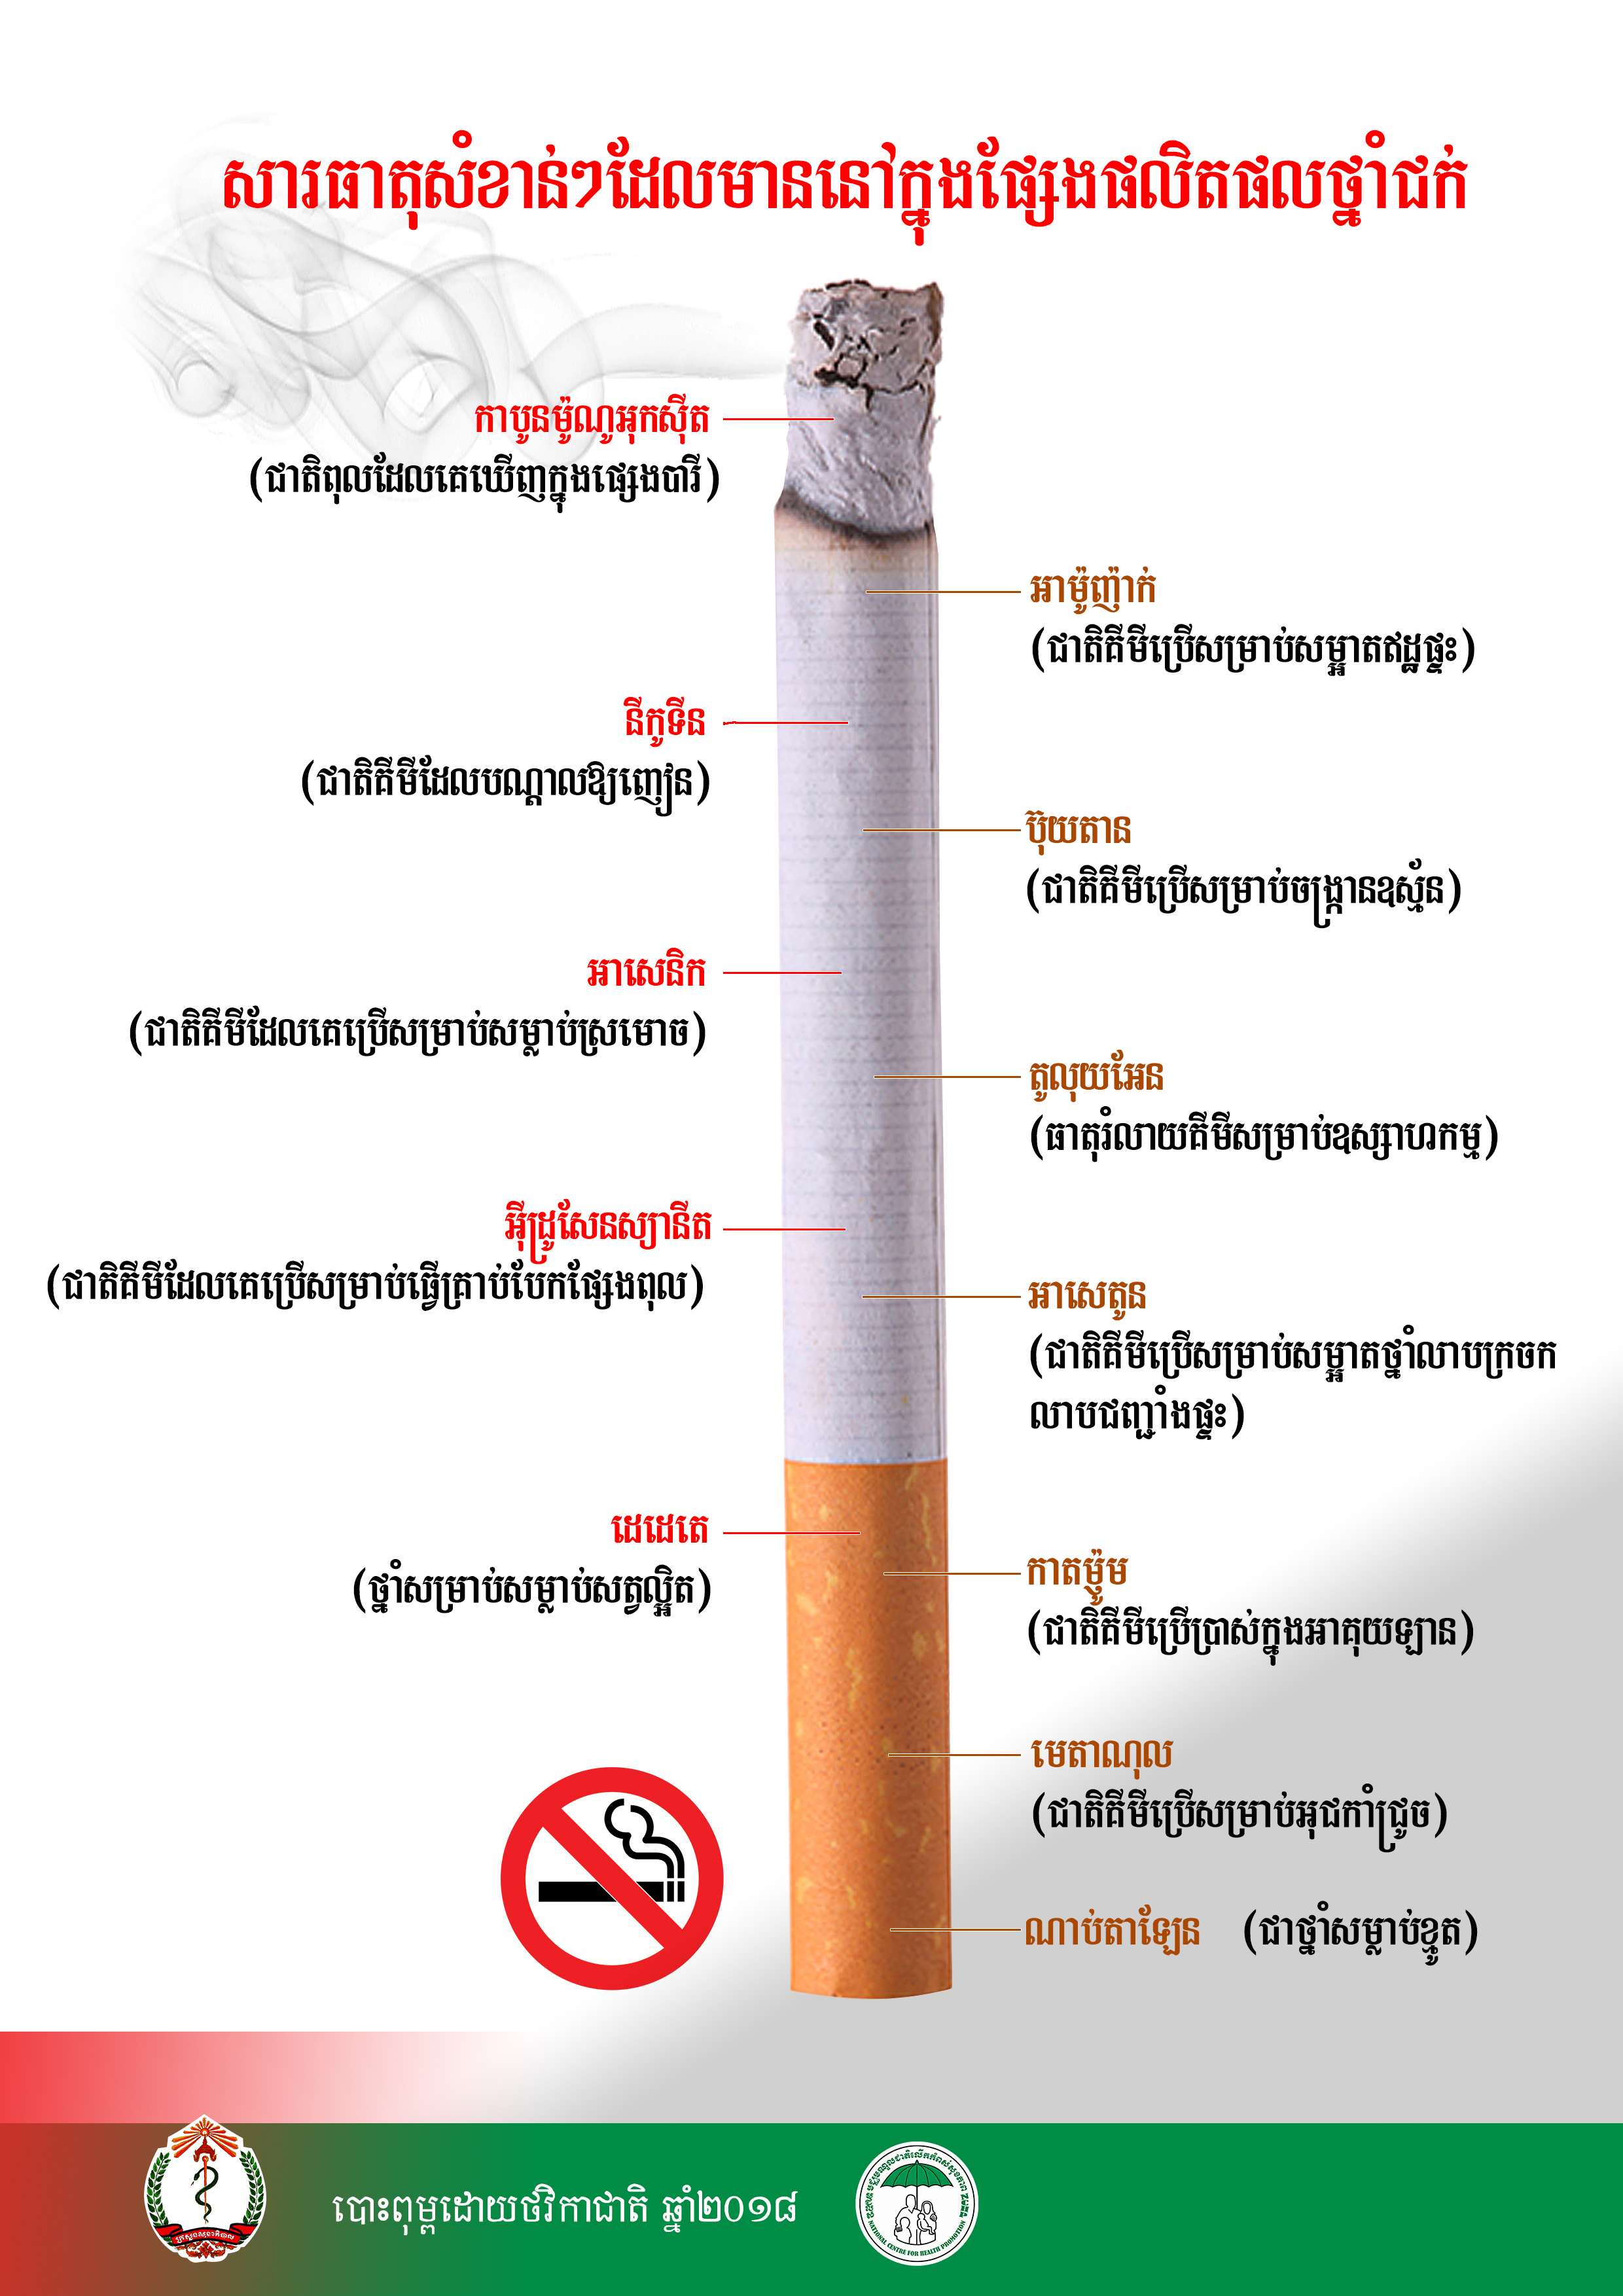 Key chemicals in tobacco products